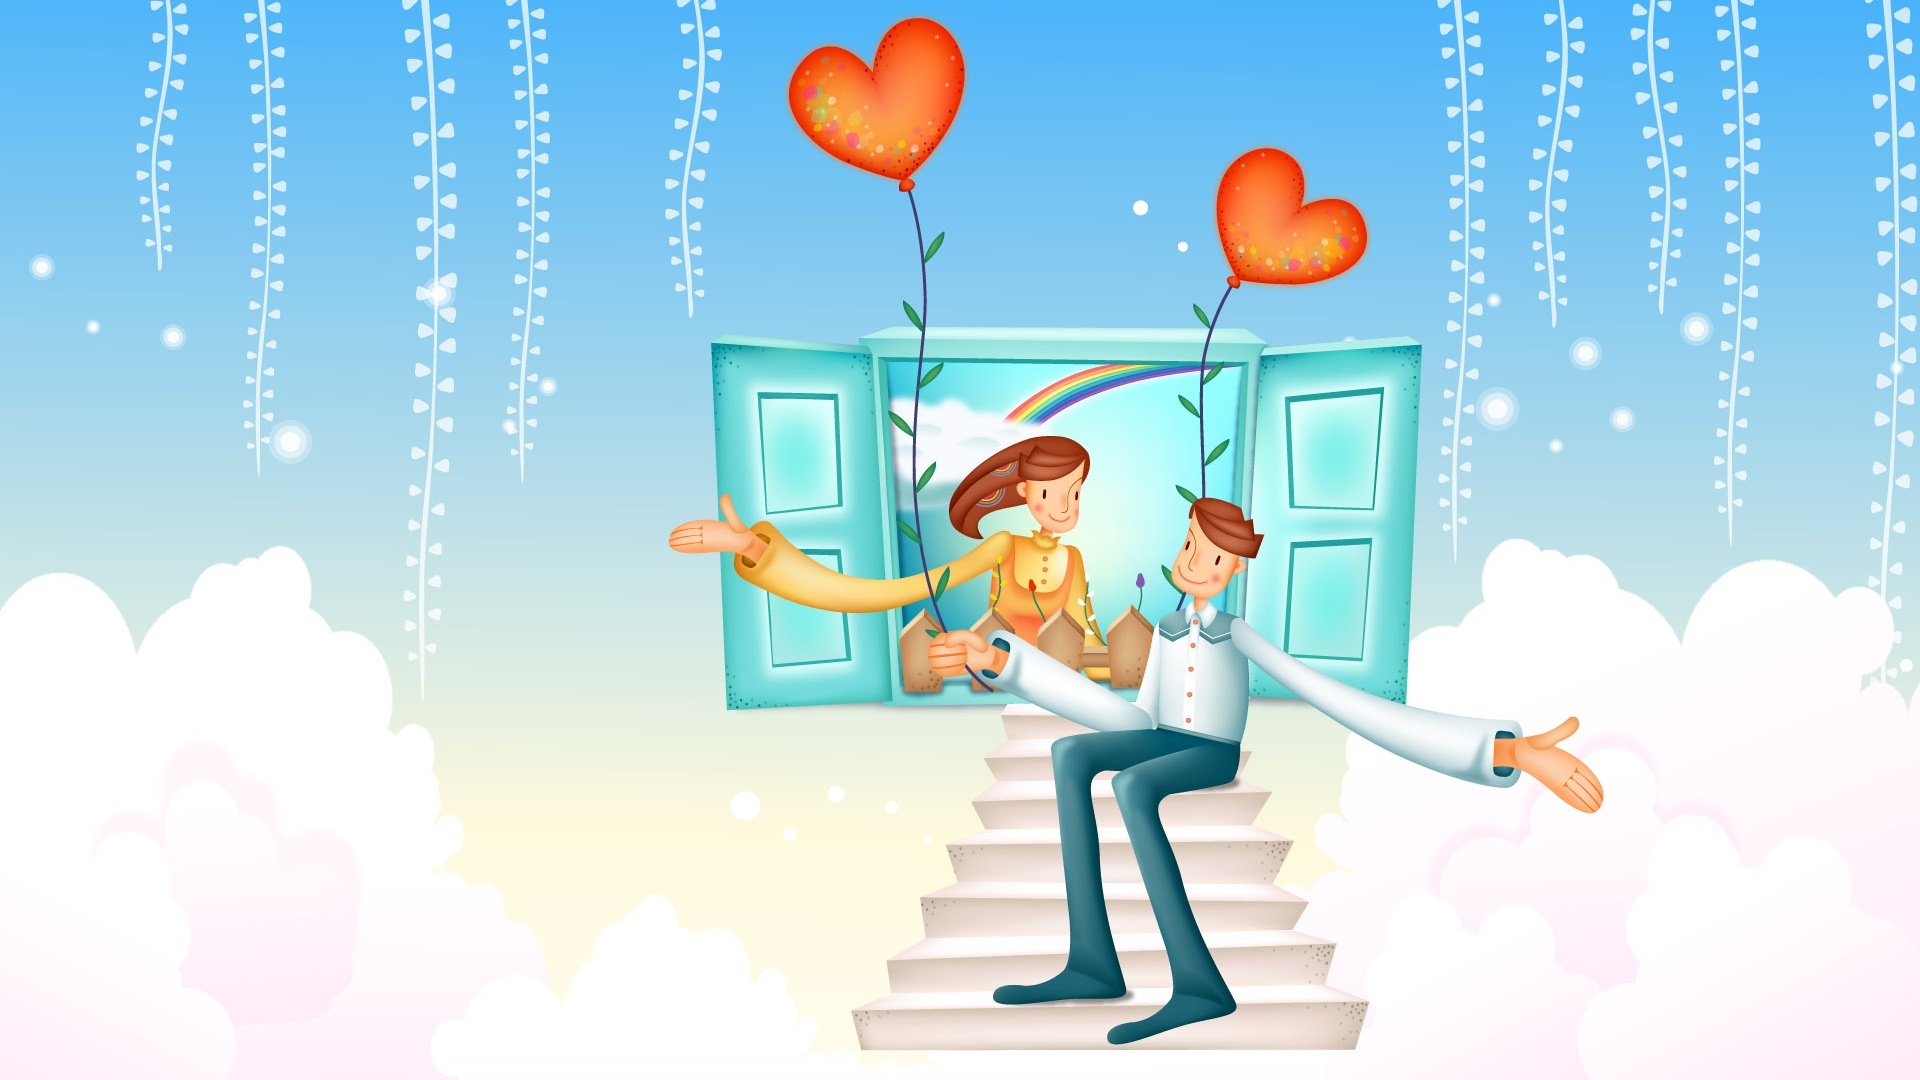 Happy Valentines Day 2015, Wallpapers, e-Greetings, Download, Couples